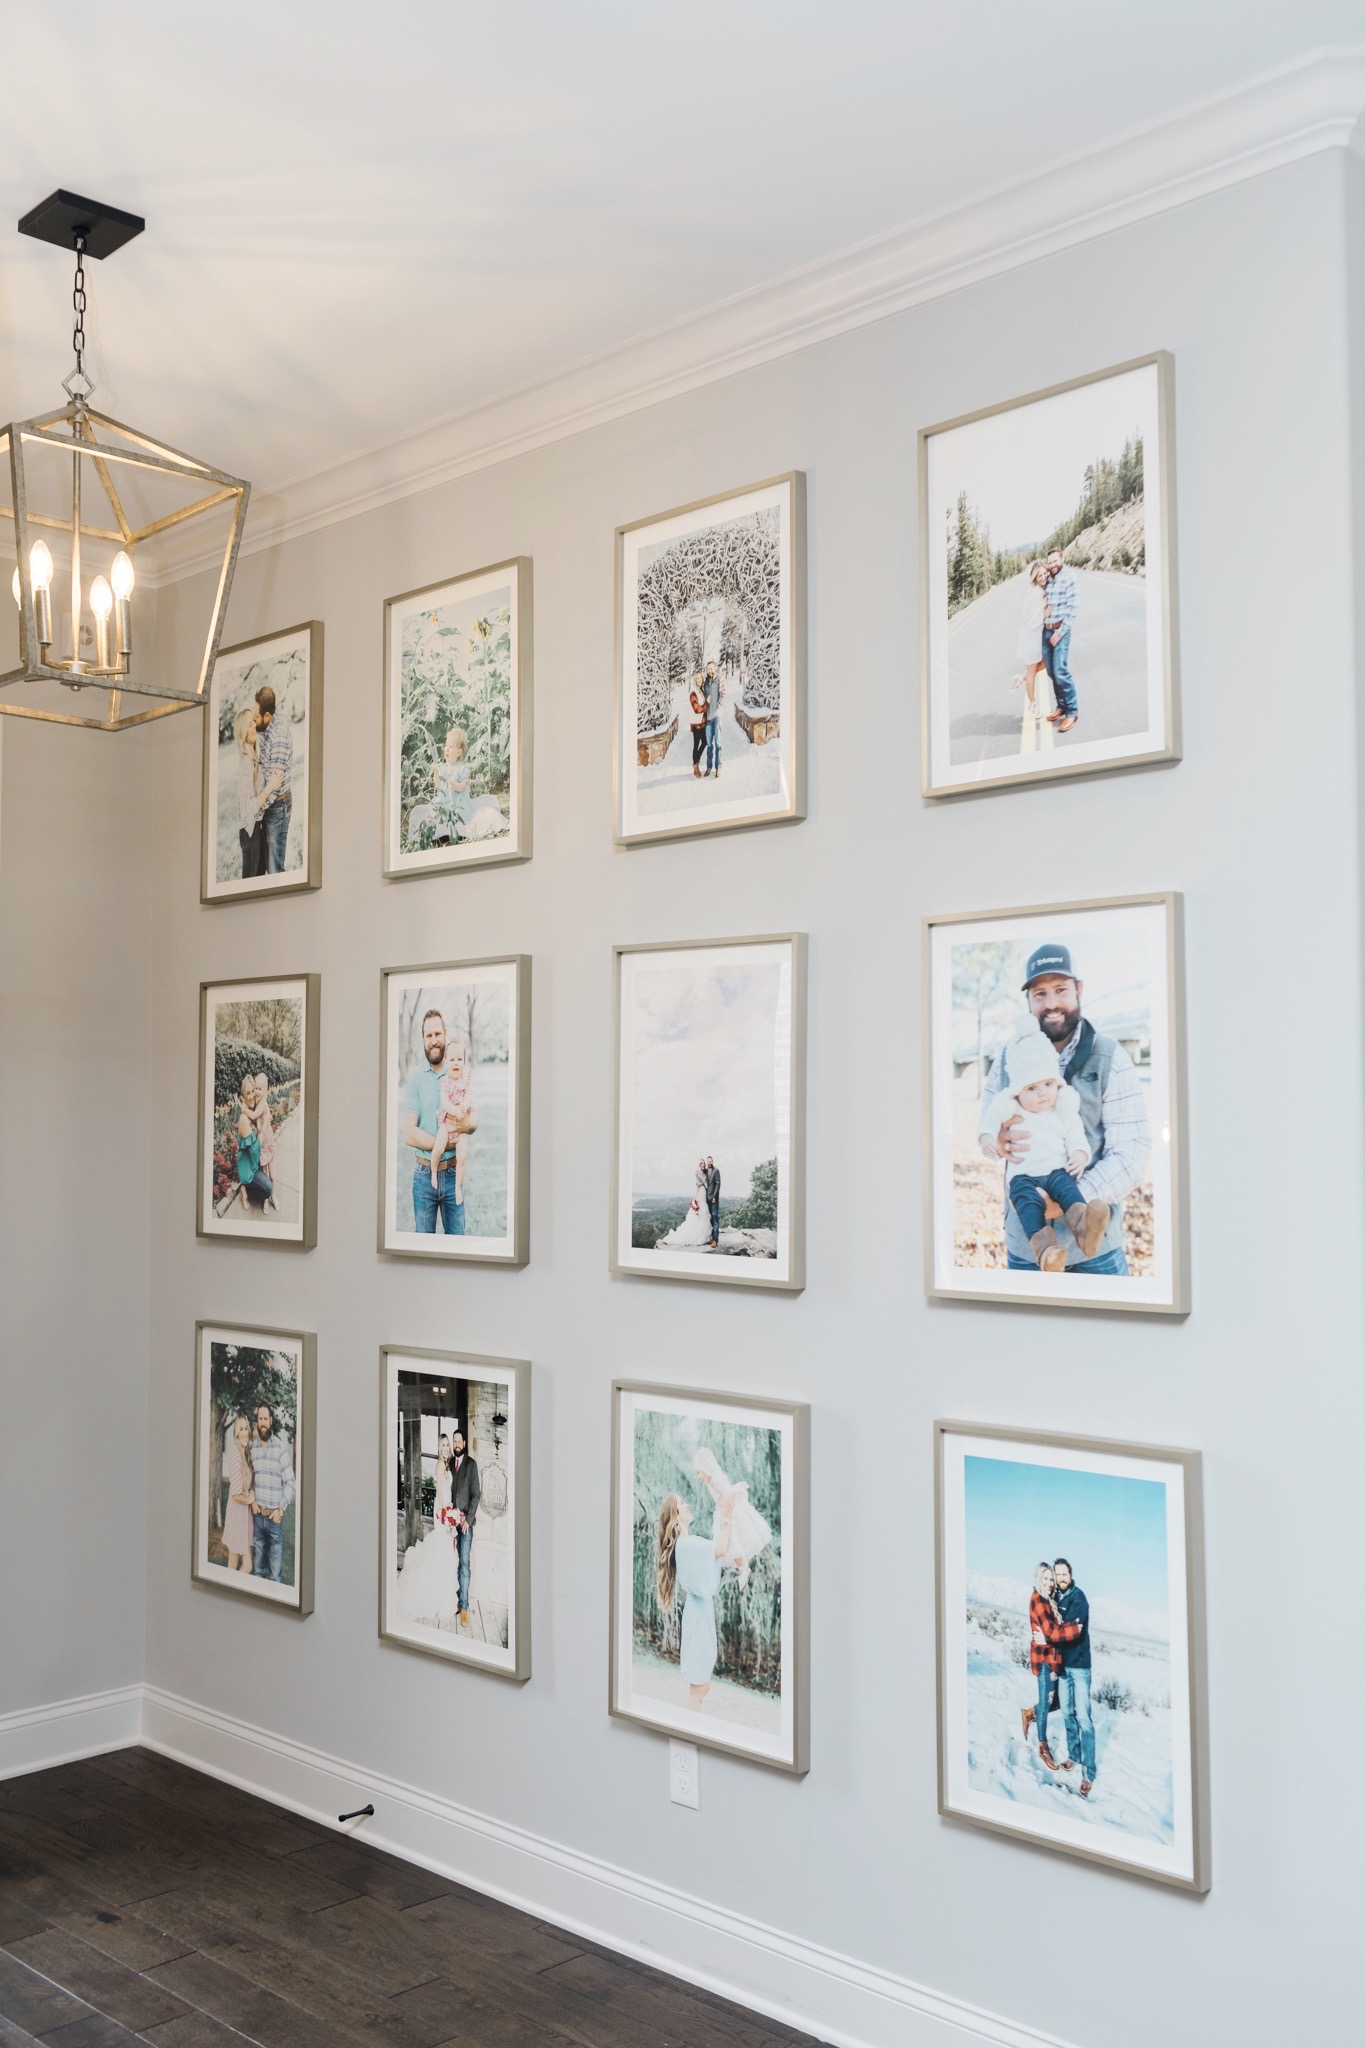 Humble clip-frame makes way for the chic 'gallery wall